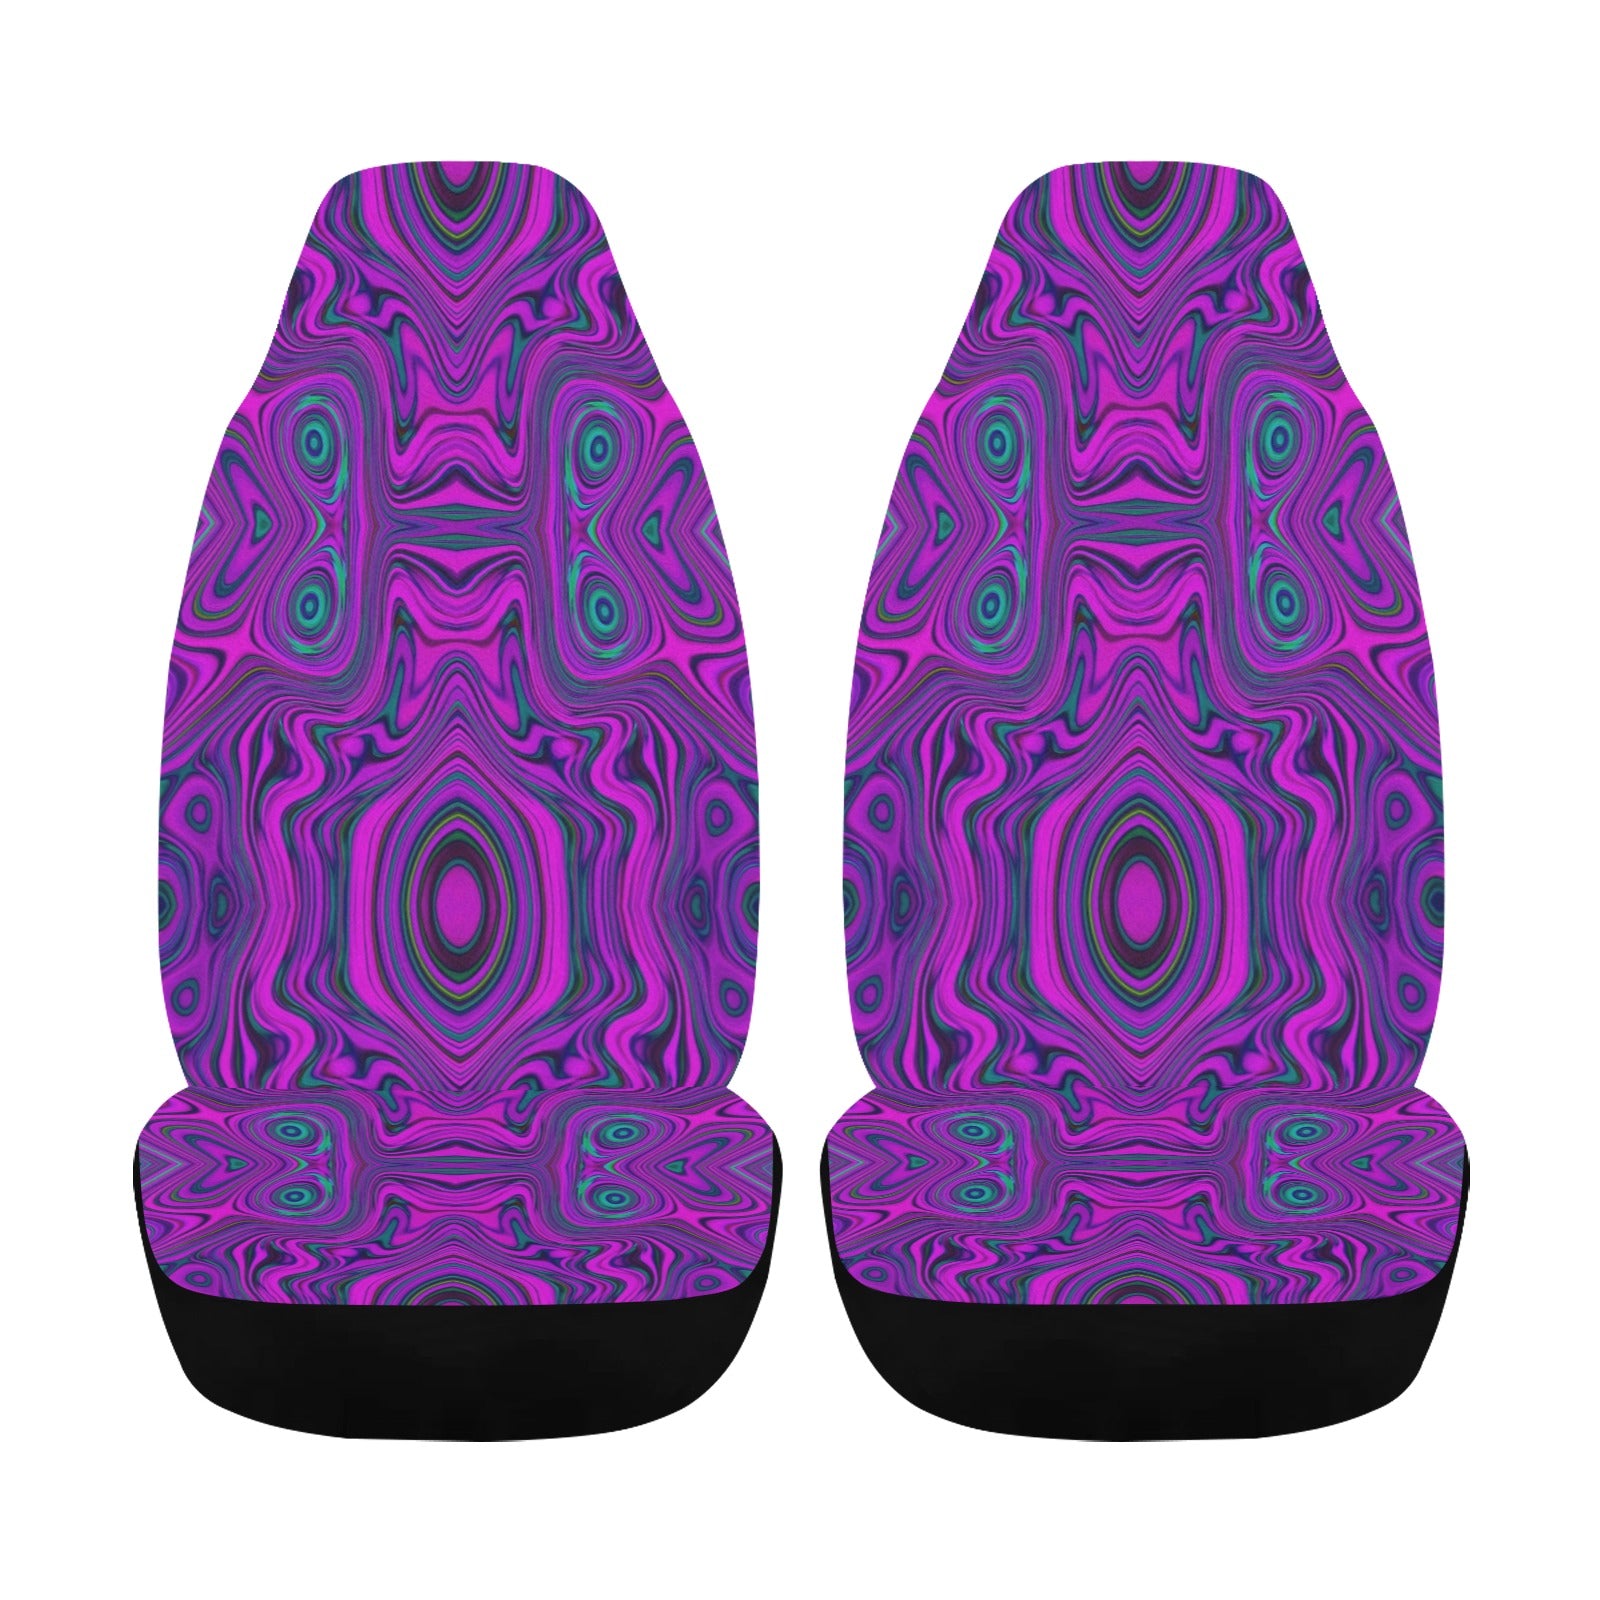 Car Seat Covers, Trippy Retro Magenta and Black Abstract Pattern